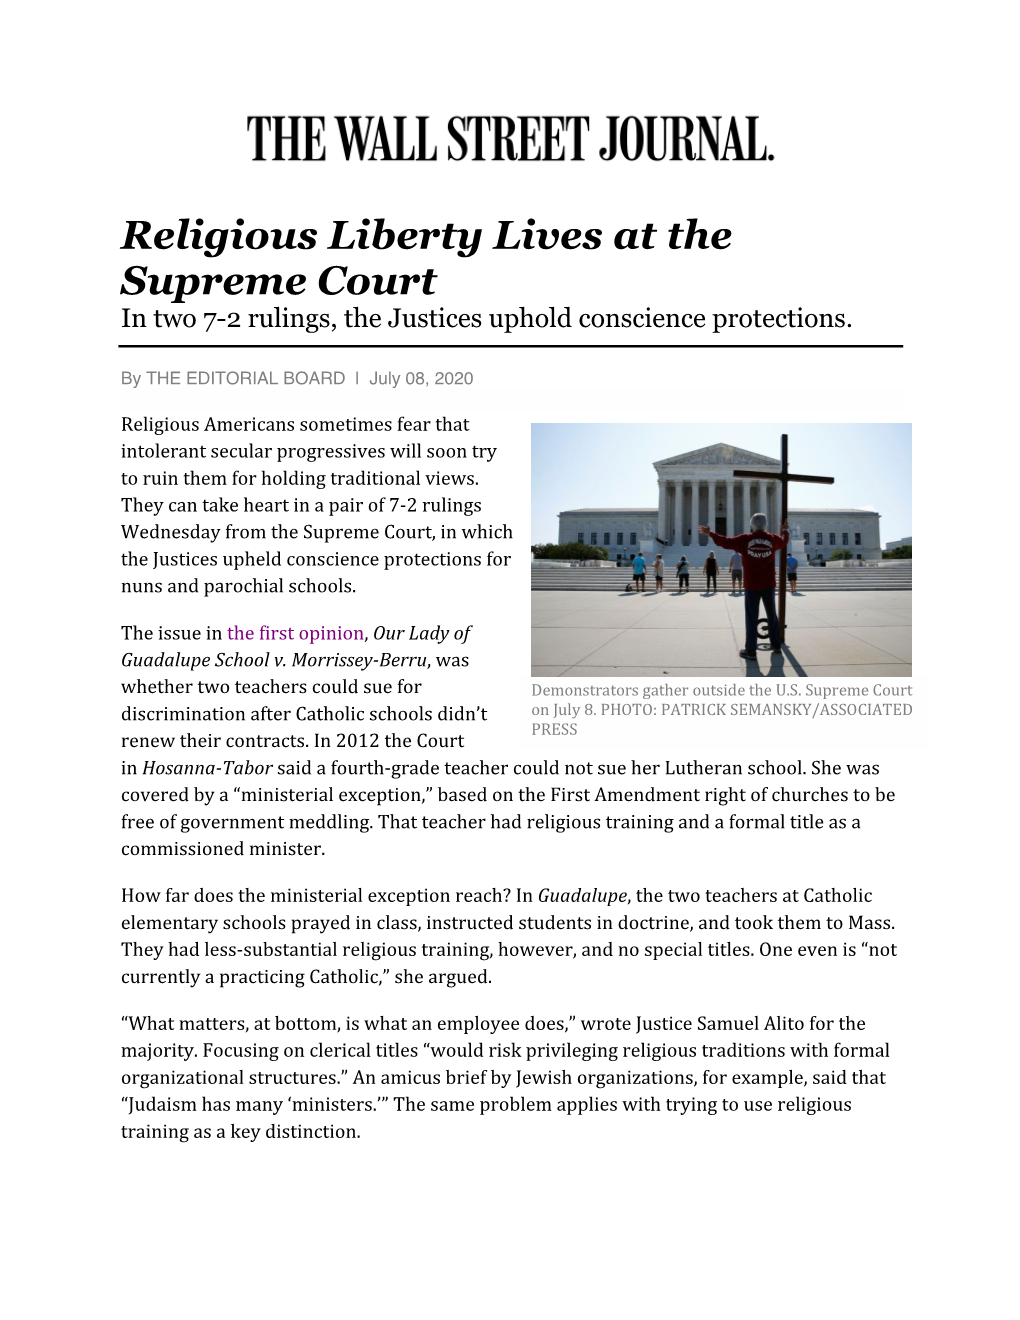 Religious Liberty Lives at the Supreme Court in Two 7-2 Rulings, the Justices Uphold Conscience Protections